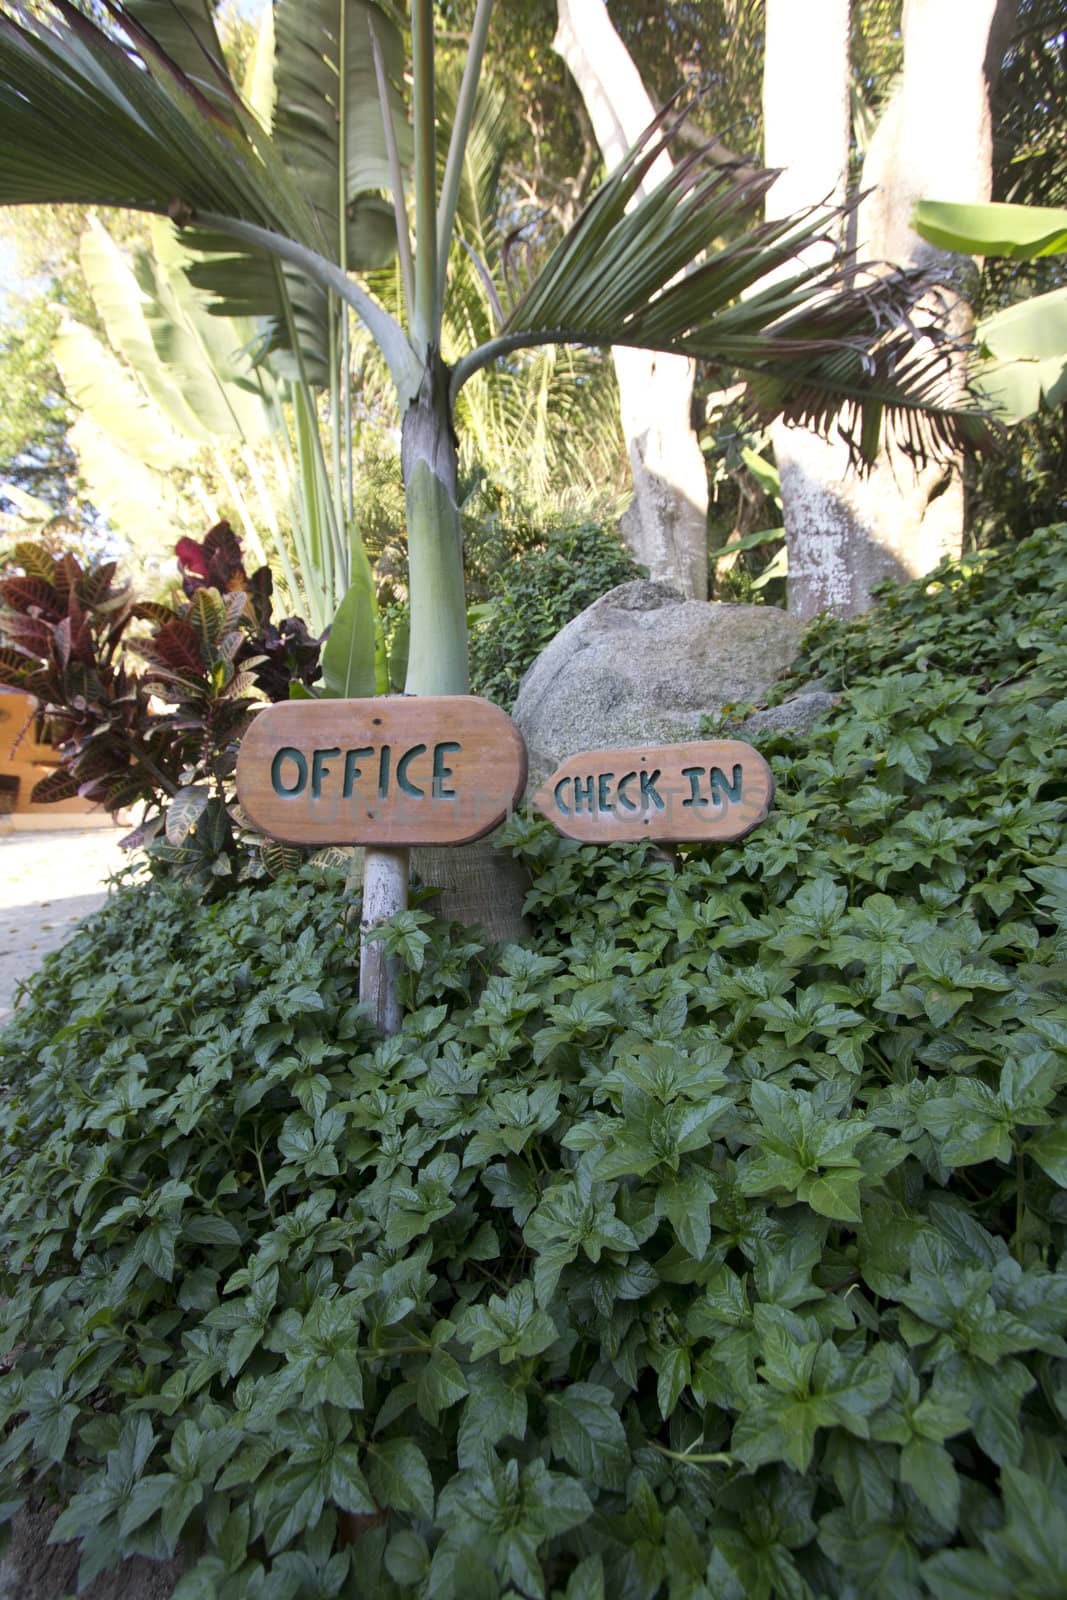 Tropical resort with office check in sign by jeremywhat